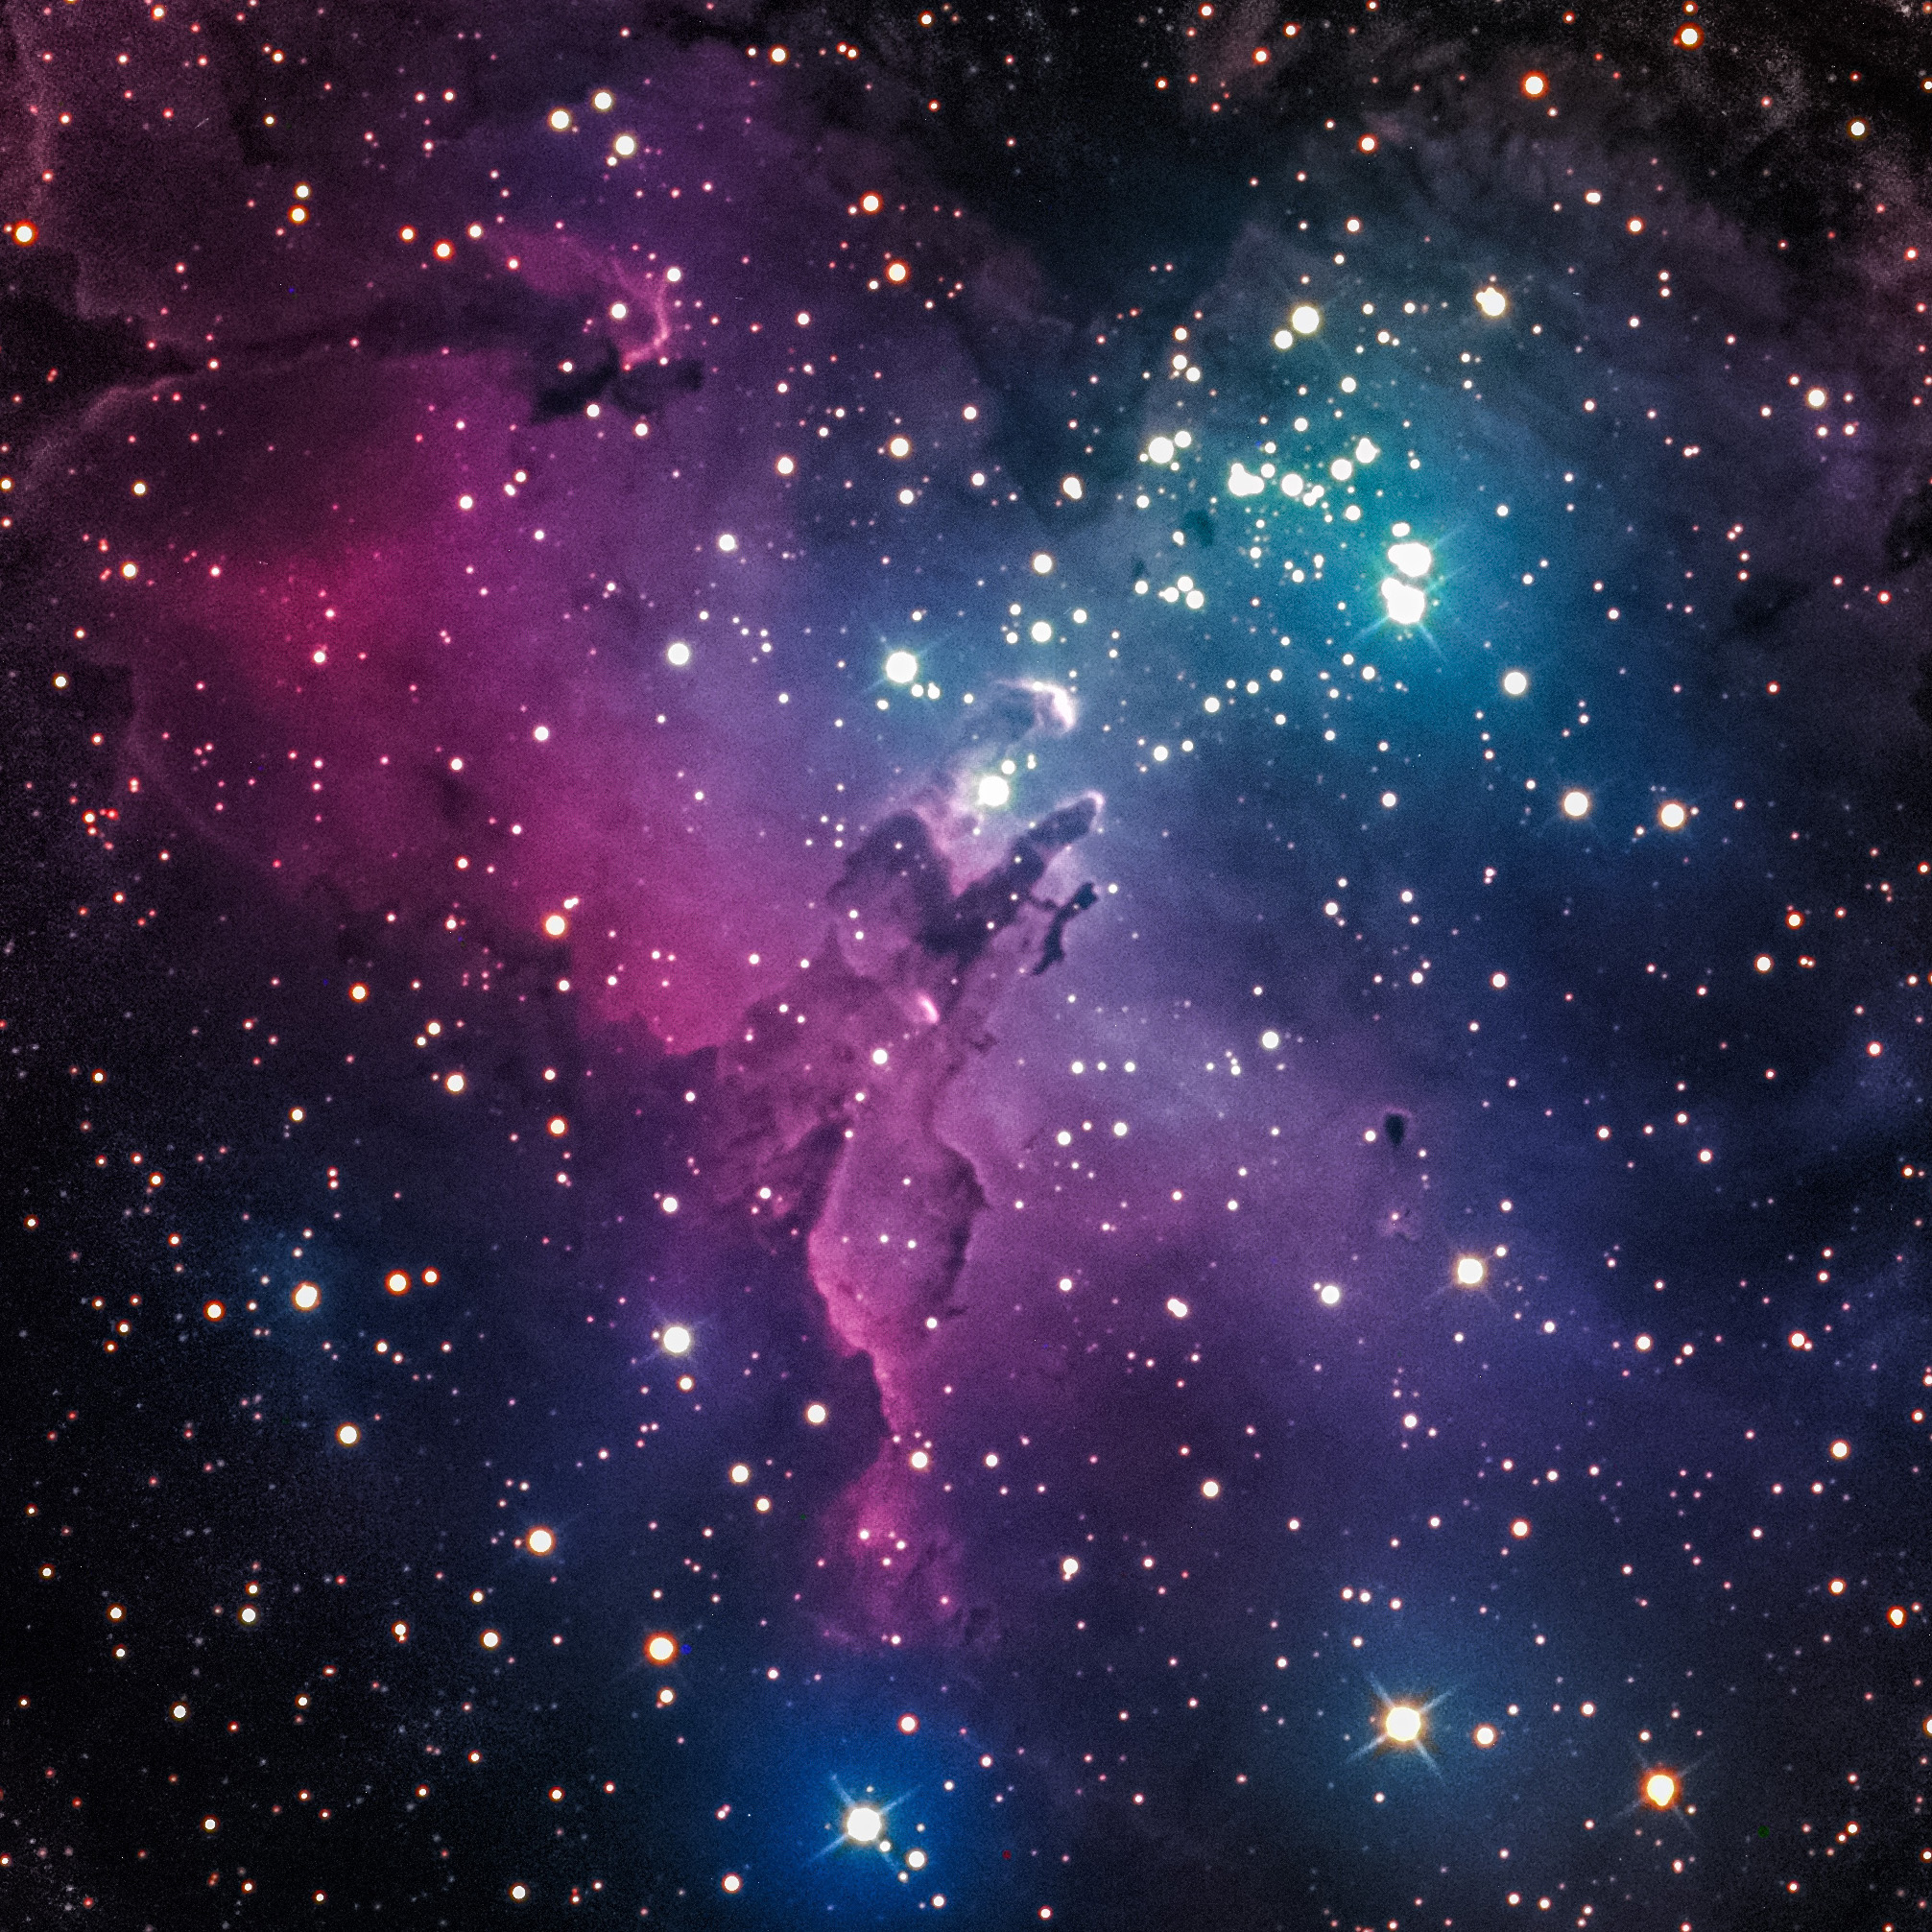 Photograph of pink and blue Eagle Nebula M16 from https://commons.wikimedia.org/wiki/File:Eagle_Nebula_M16_LRGB_Composite.jpg